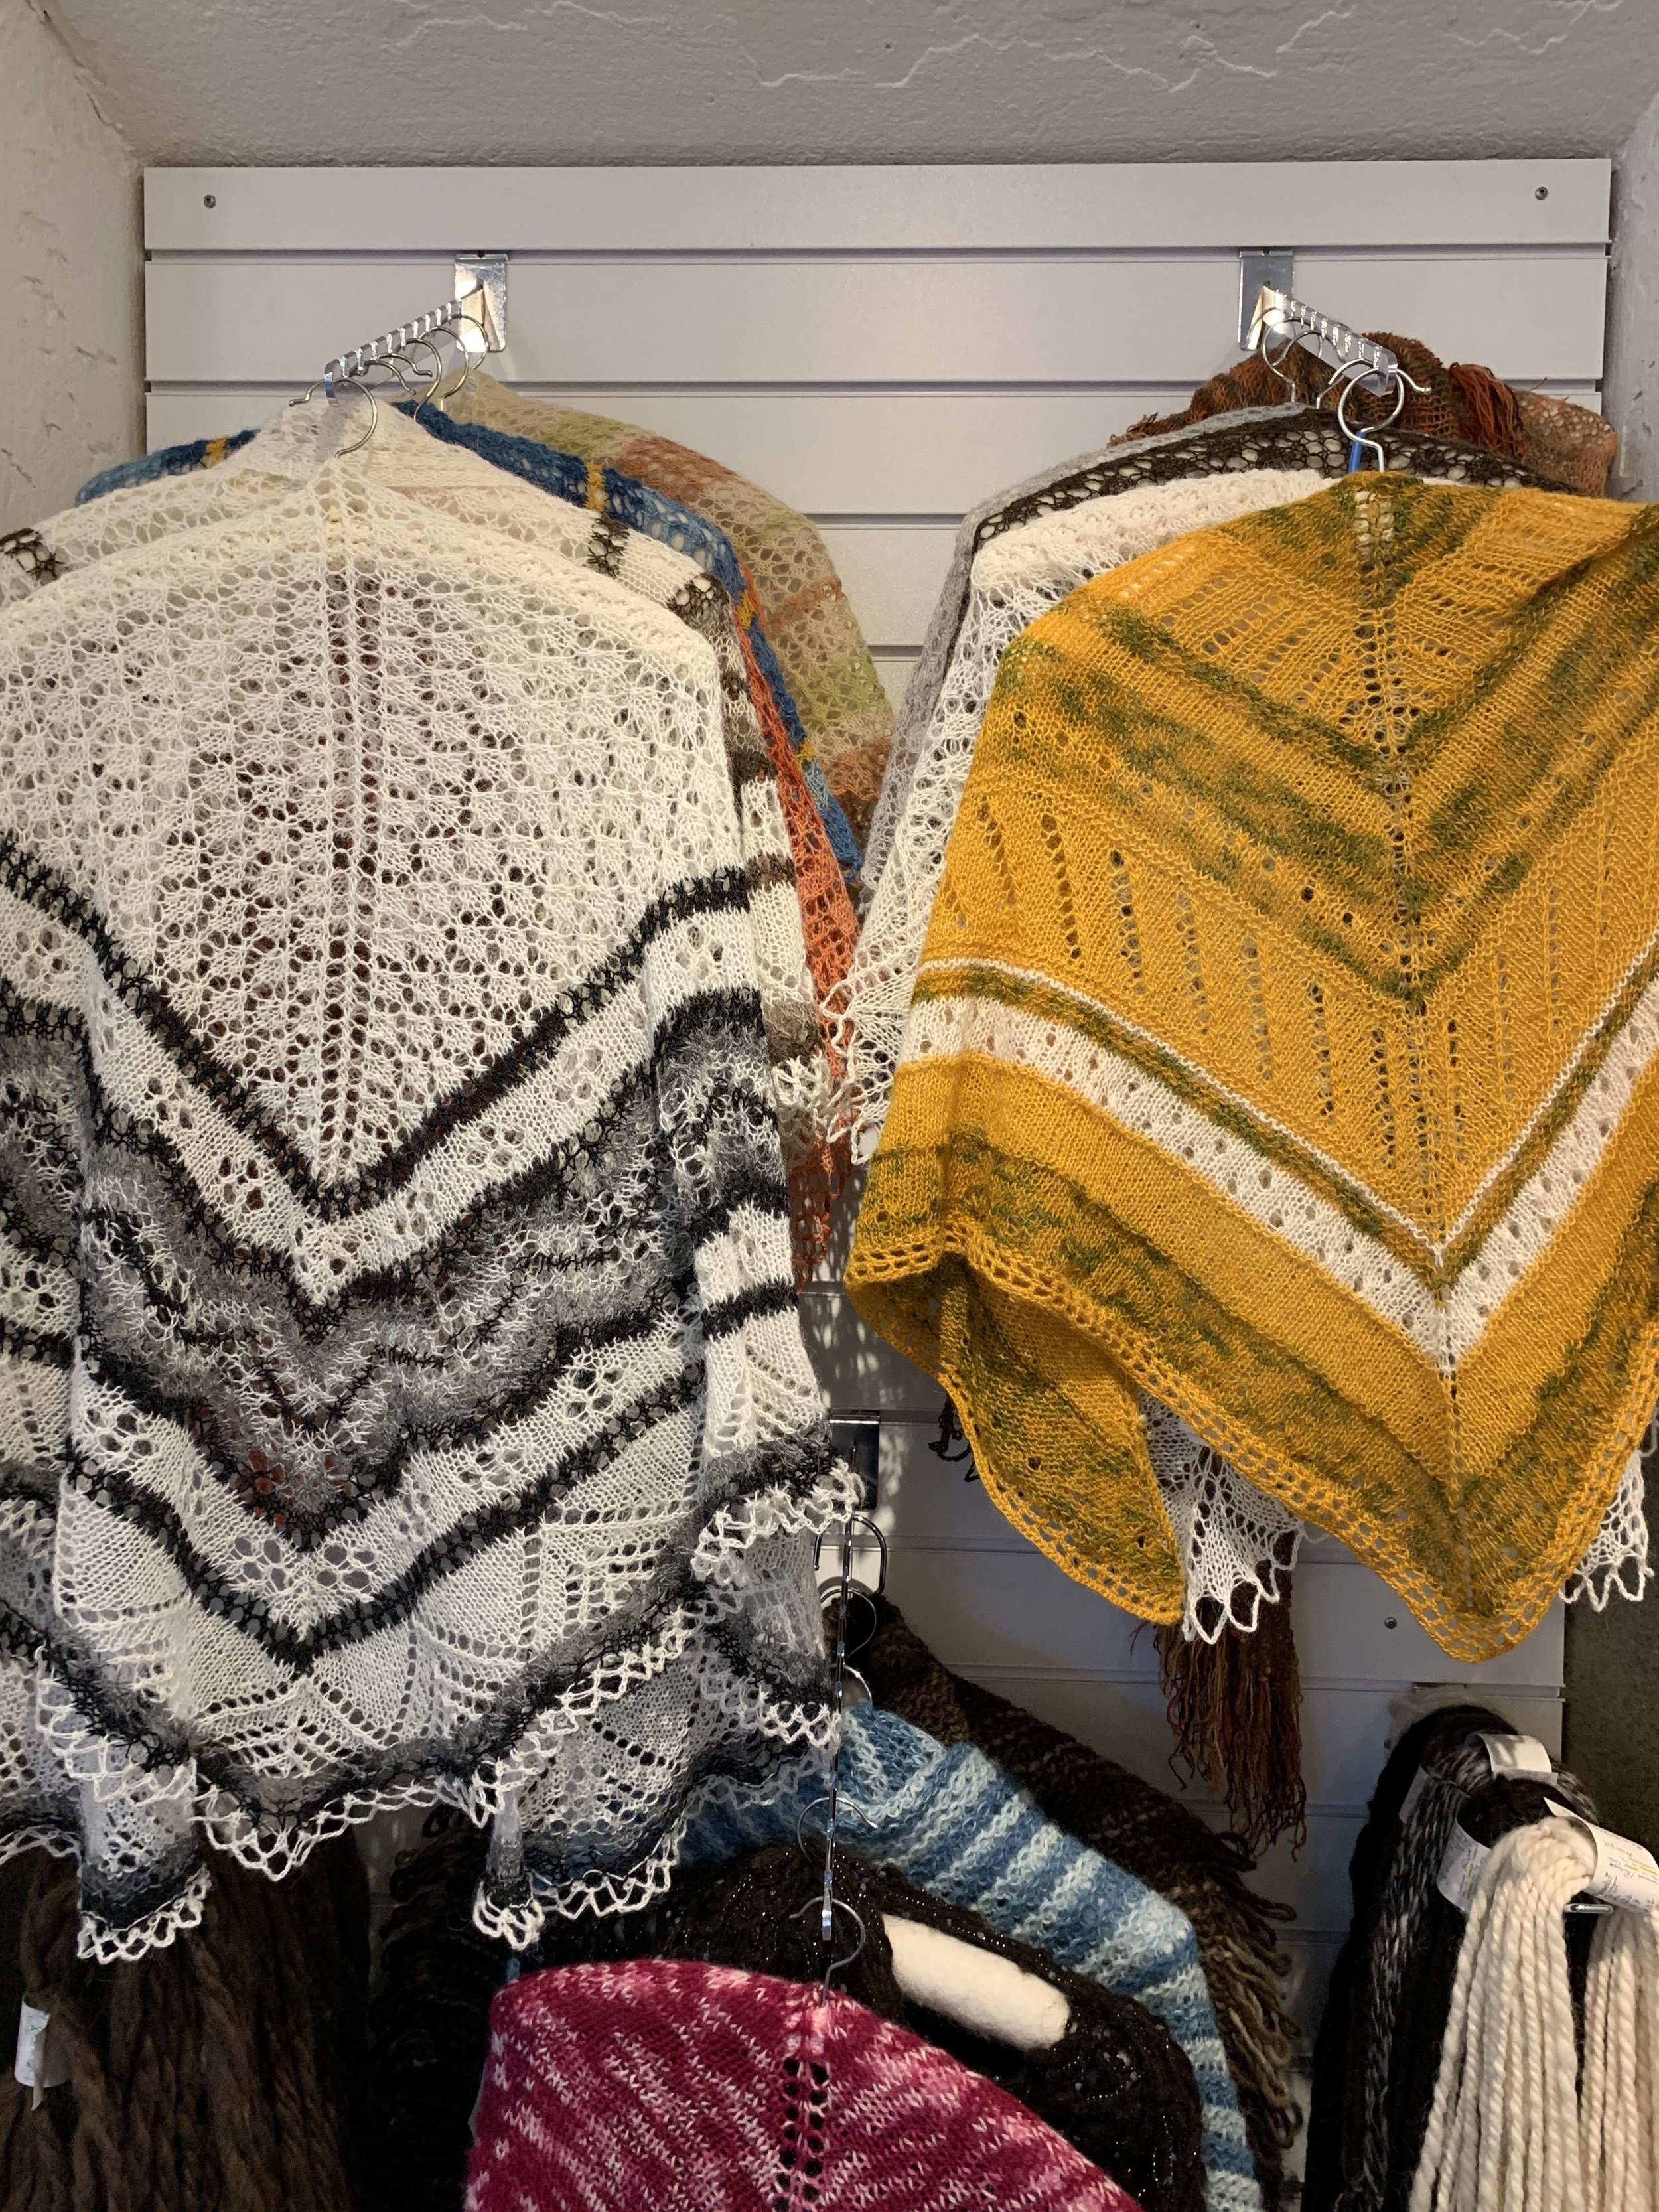  More incredible hand-knitted Icelandic creations 